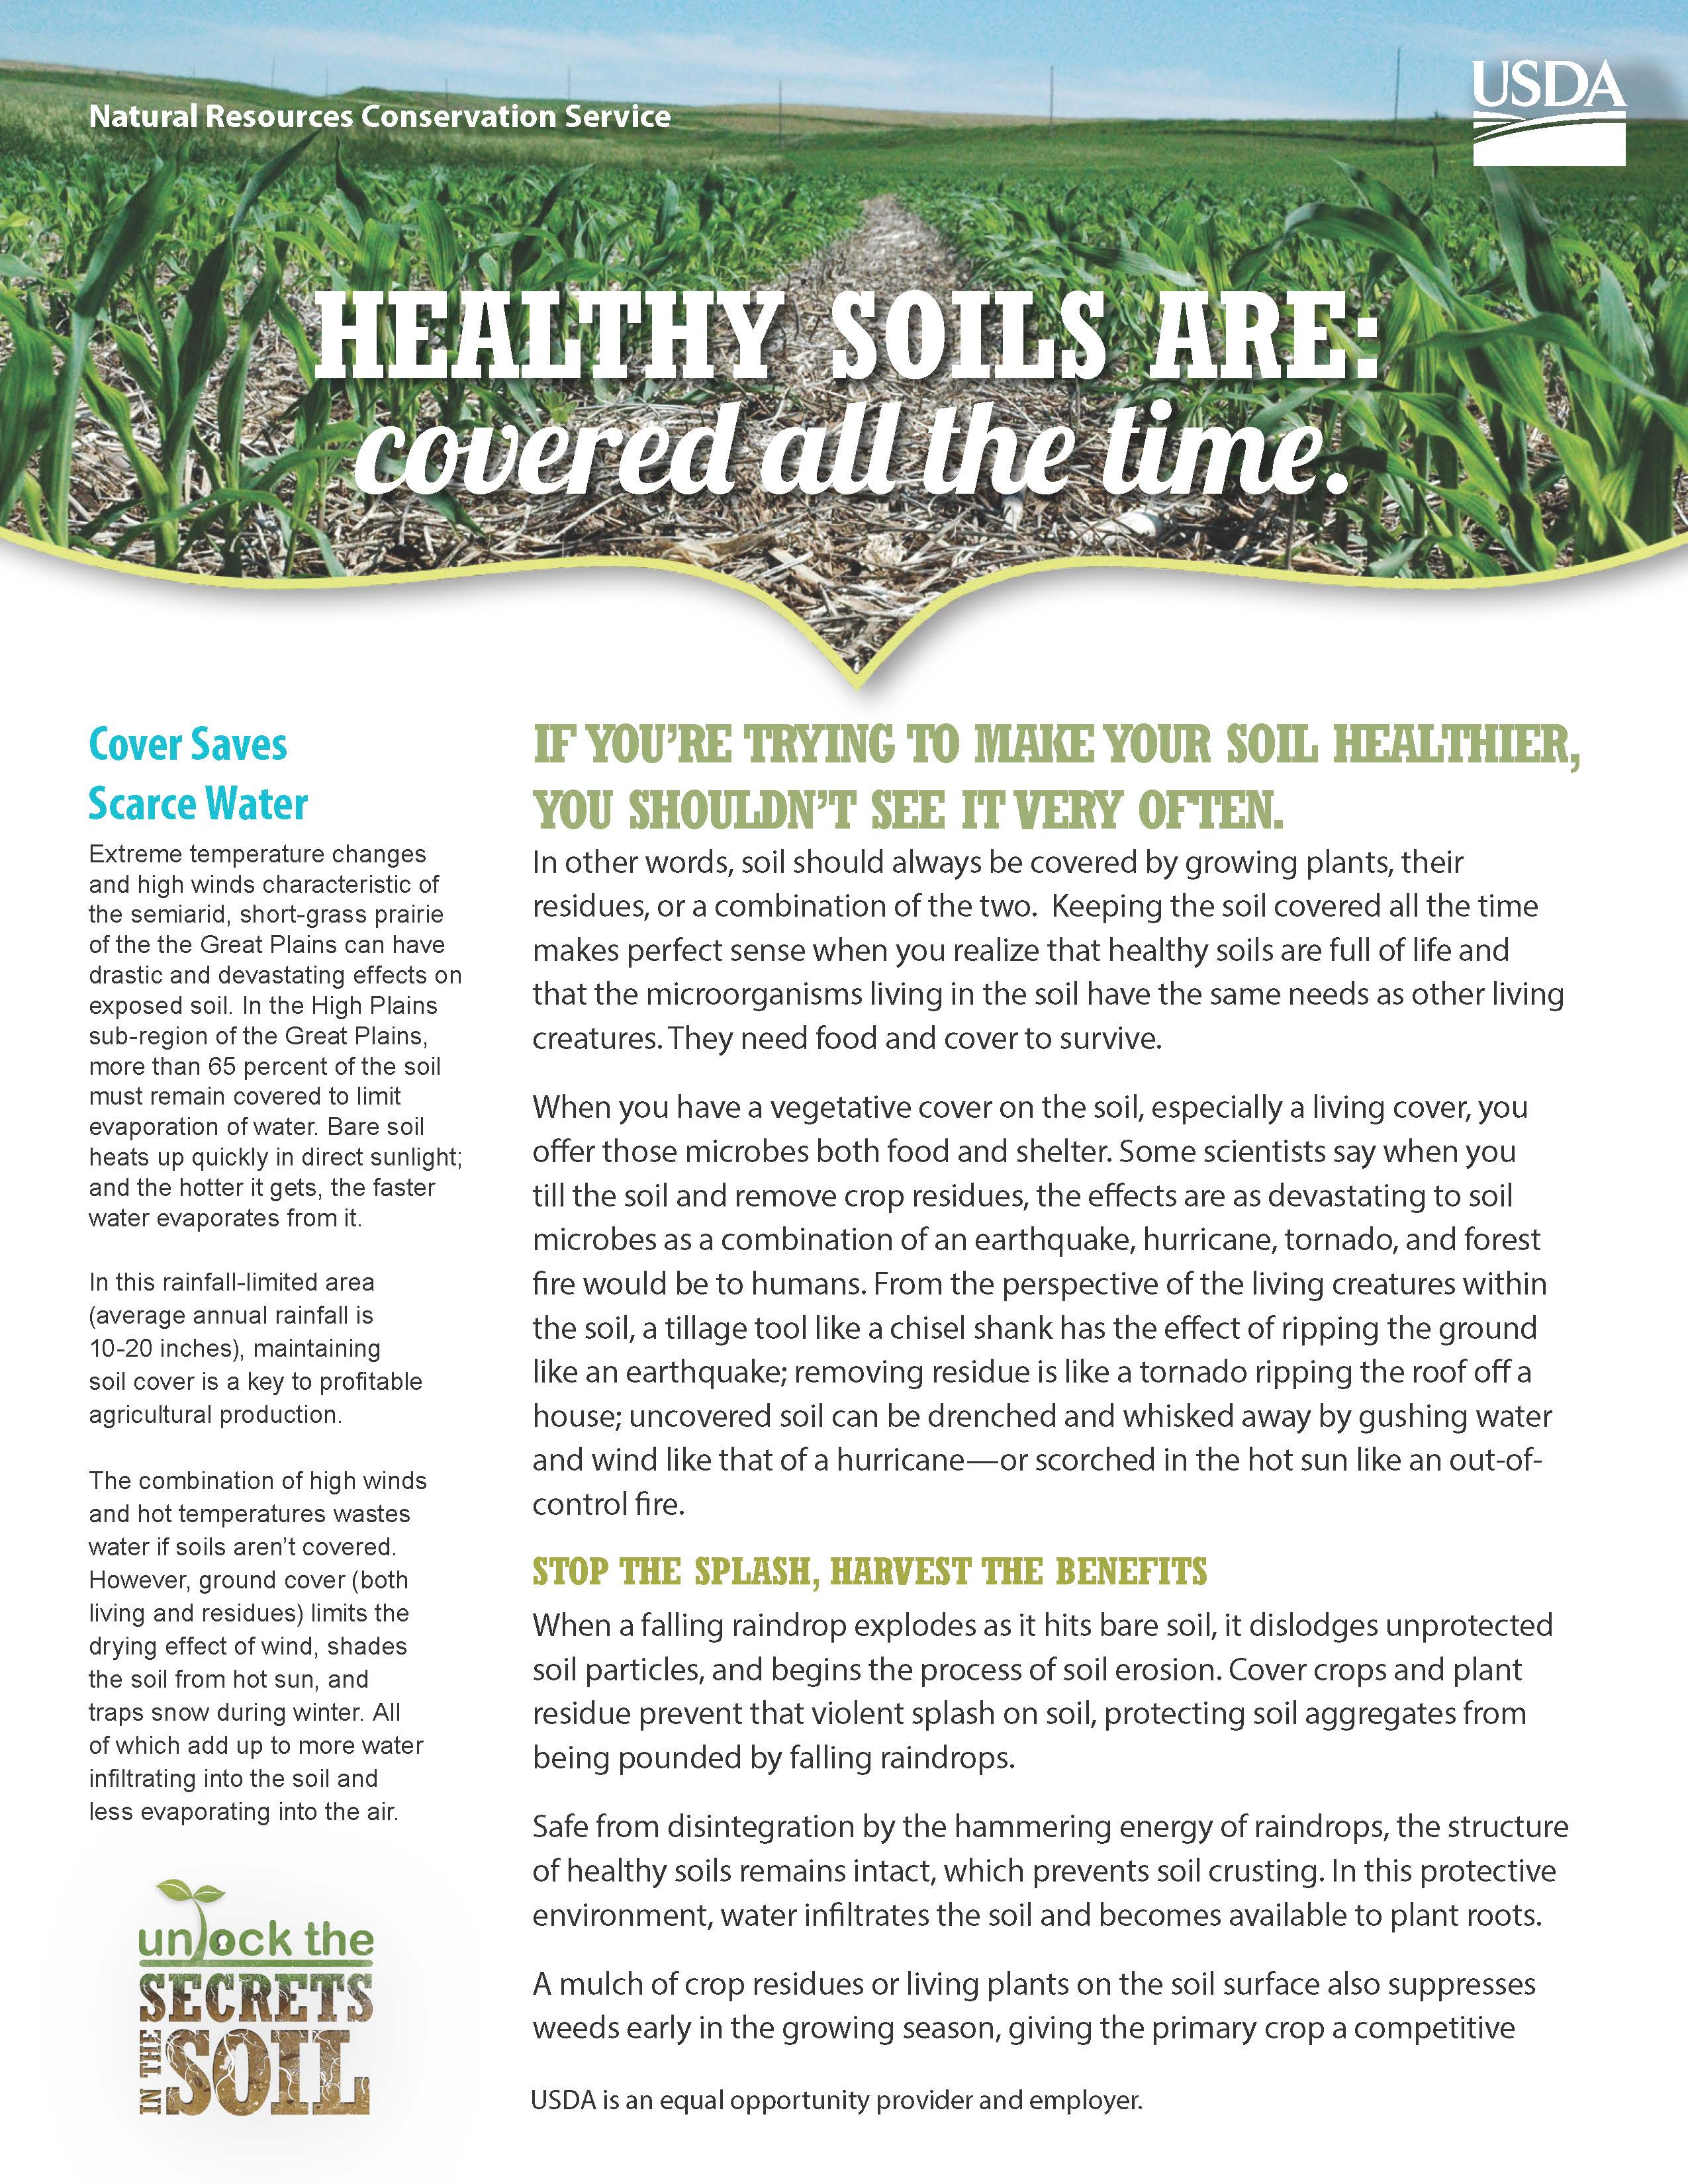 Healthy Soils Are: covered all the time